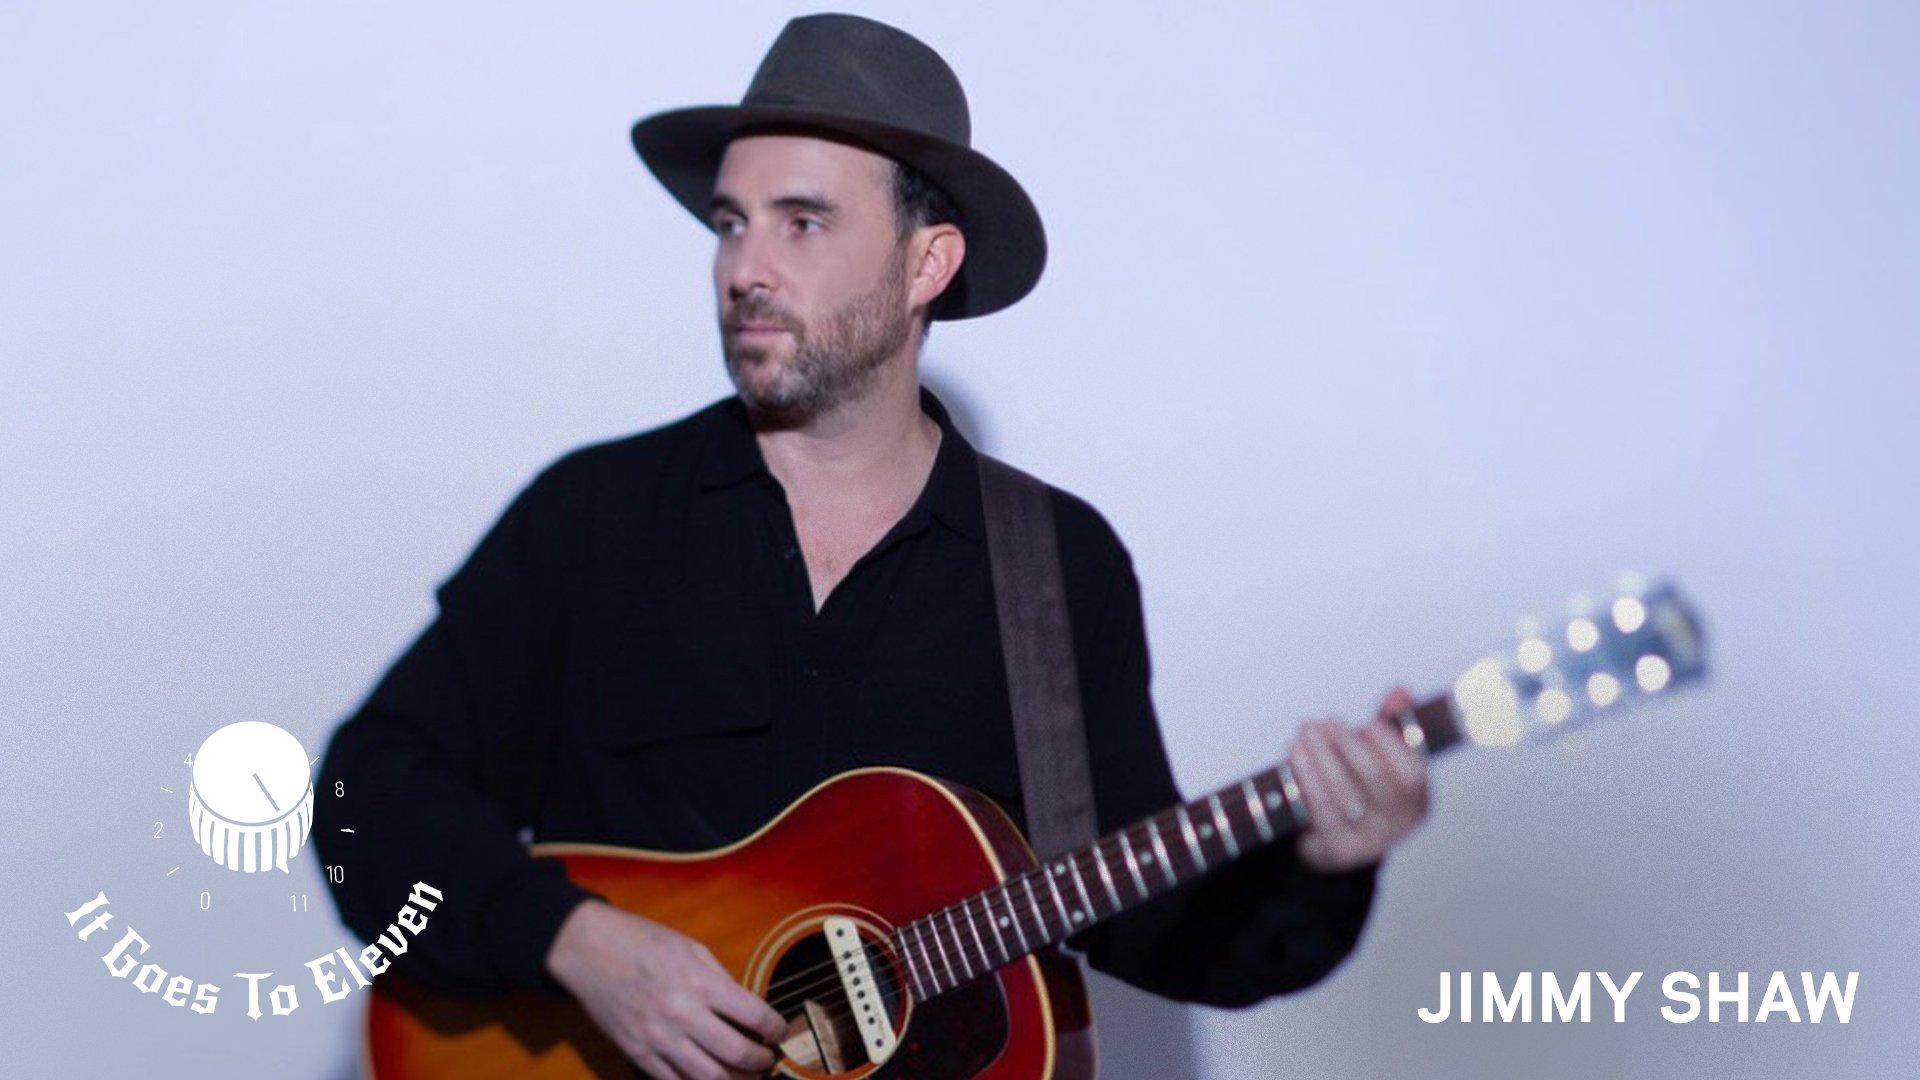 Metric's Jimmy Shaw Shows Off His Favorite Guitar